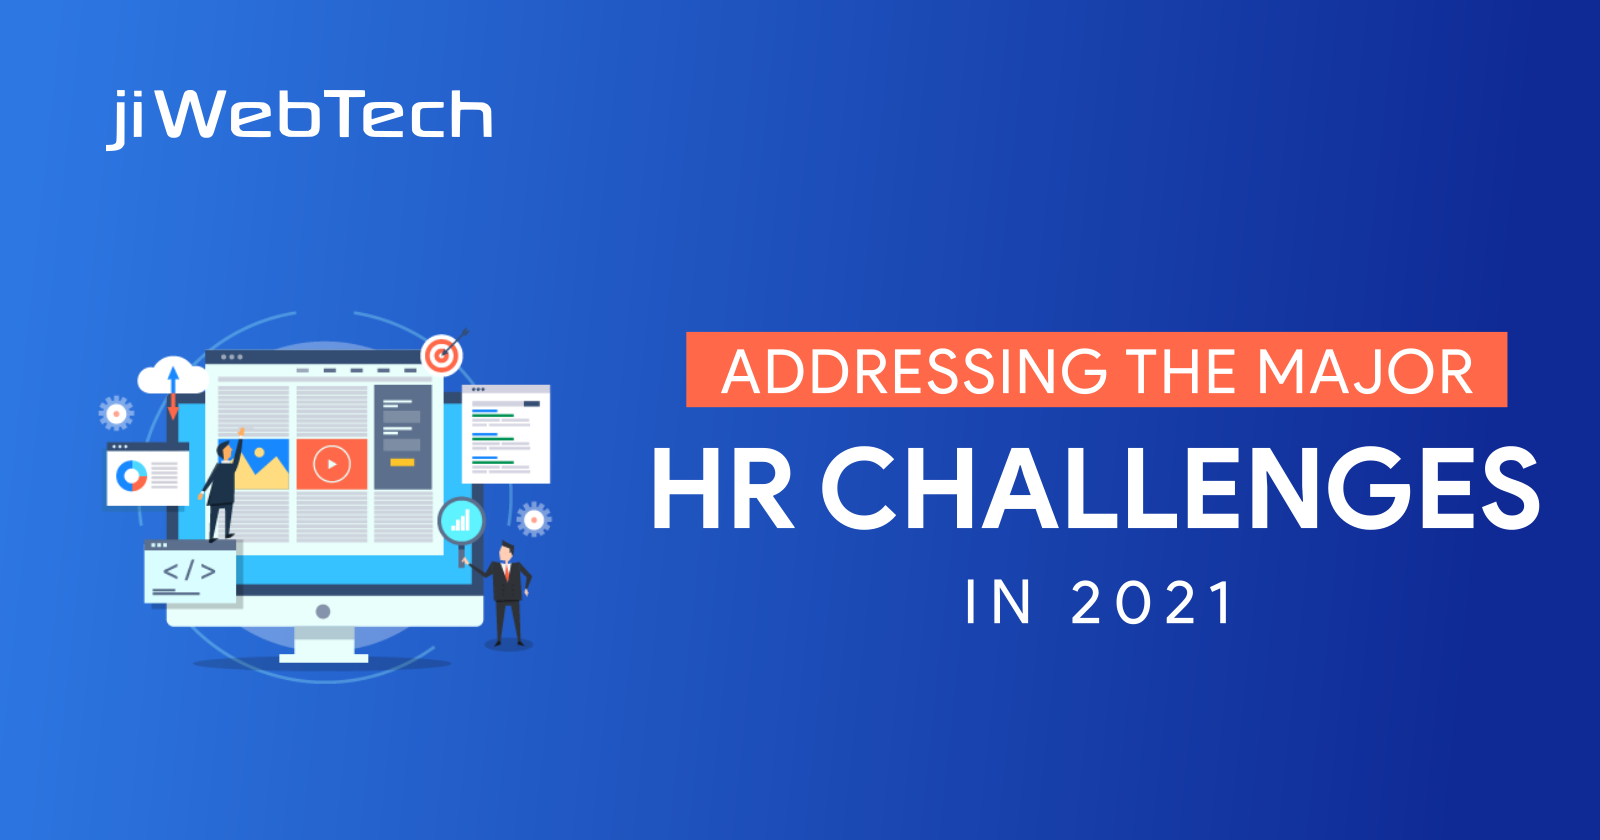 Addressing the Major HR Challenges in 2021